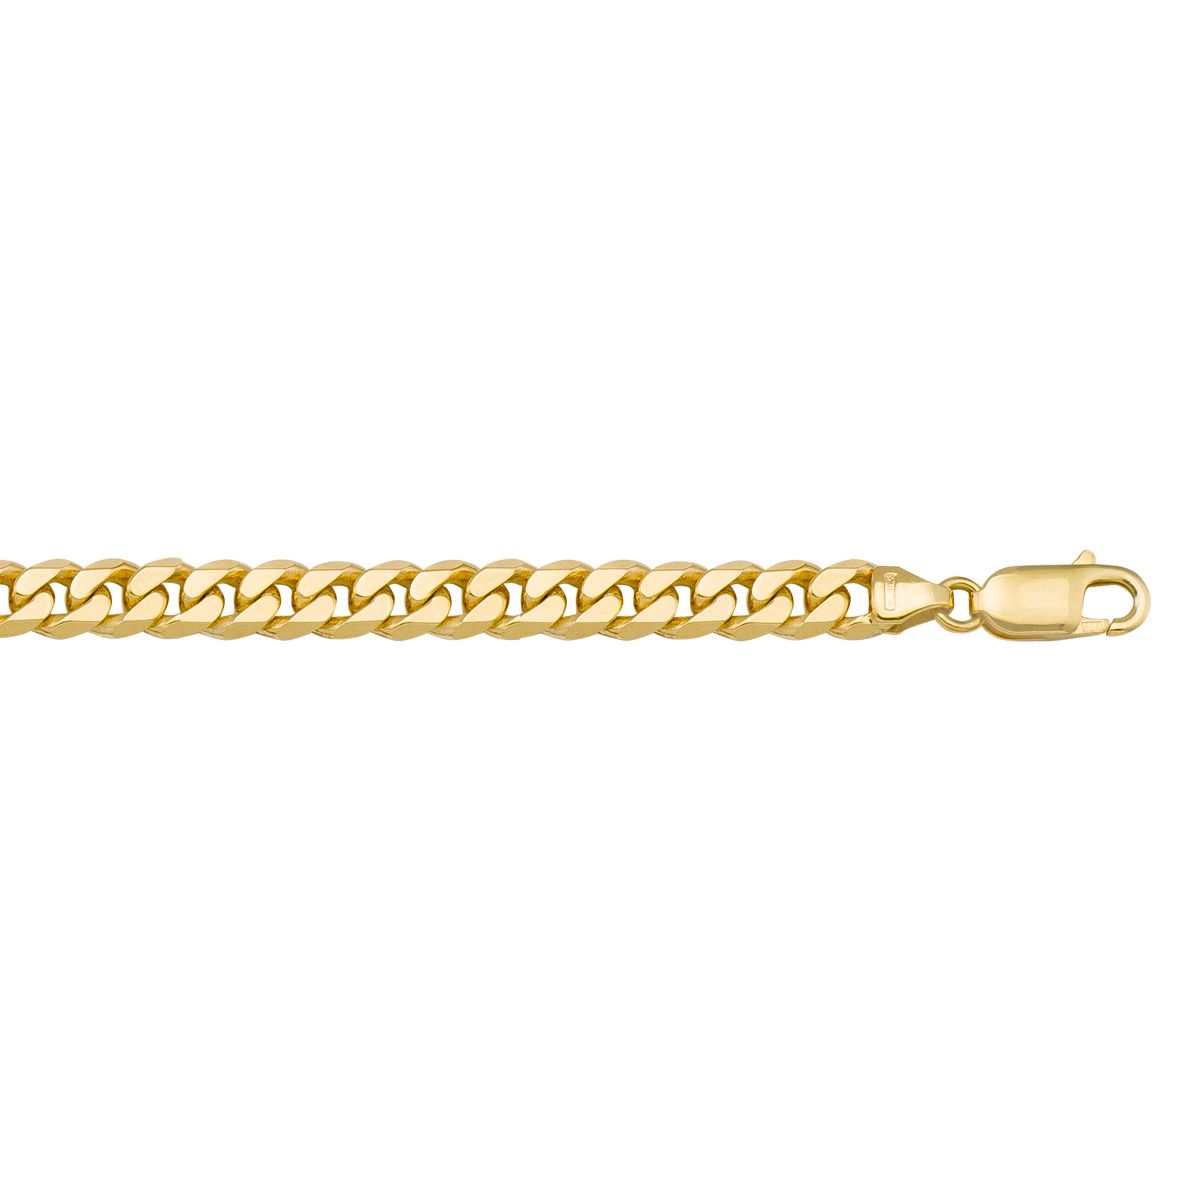 CCRB02, Gold Bracelet, Flat Beveled Curb, Yellow Gold